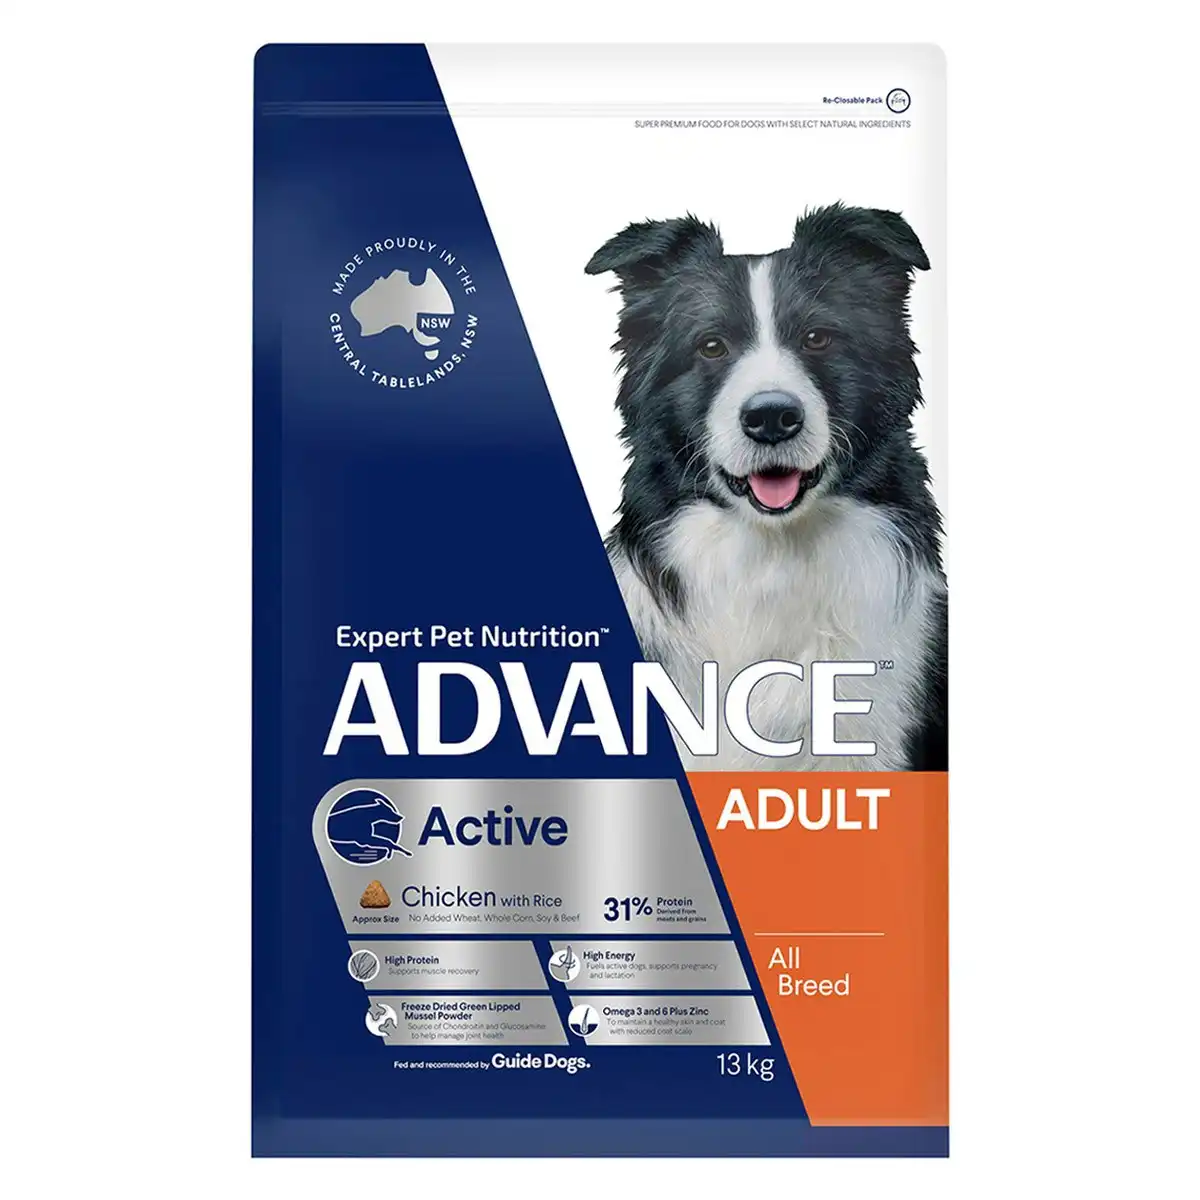 ADVANCE Active Adult All Breed Chicken with Rice Dry Dog Food 13 Kg